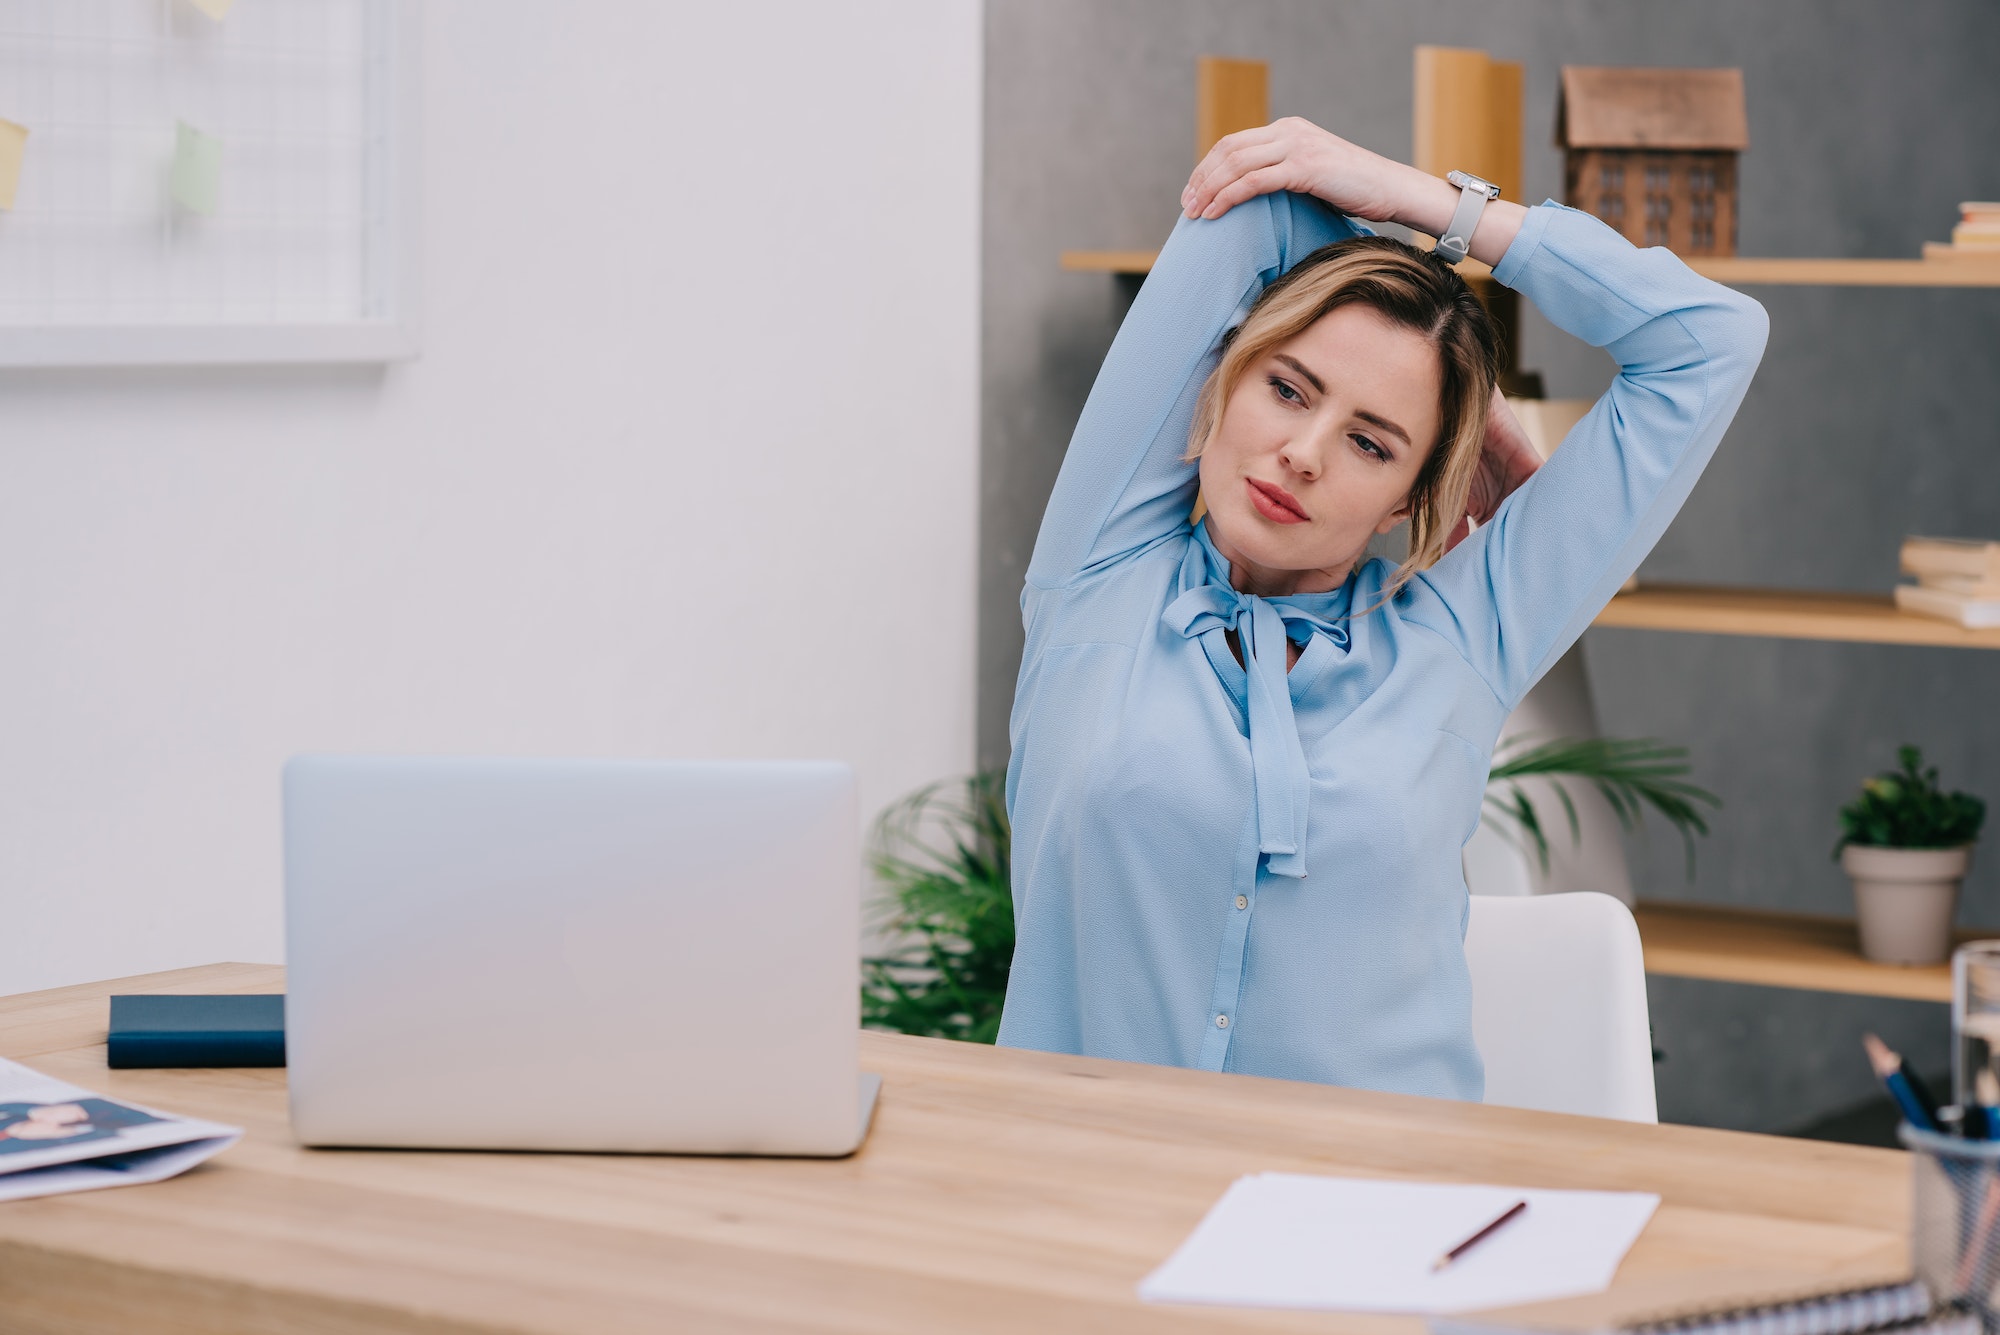 businesswoman stretching shoulders at workplace in office